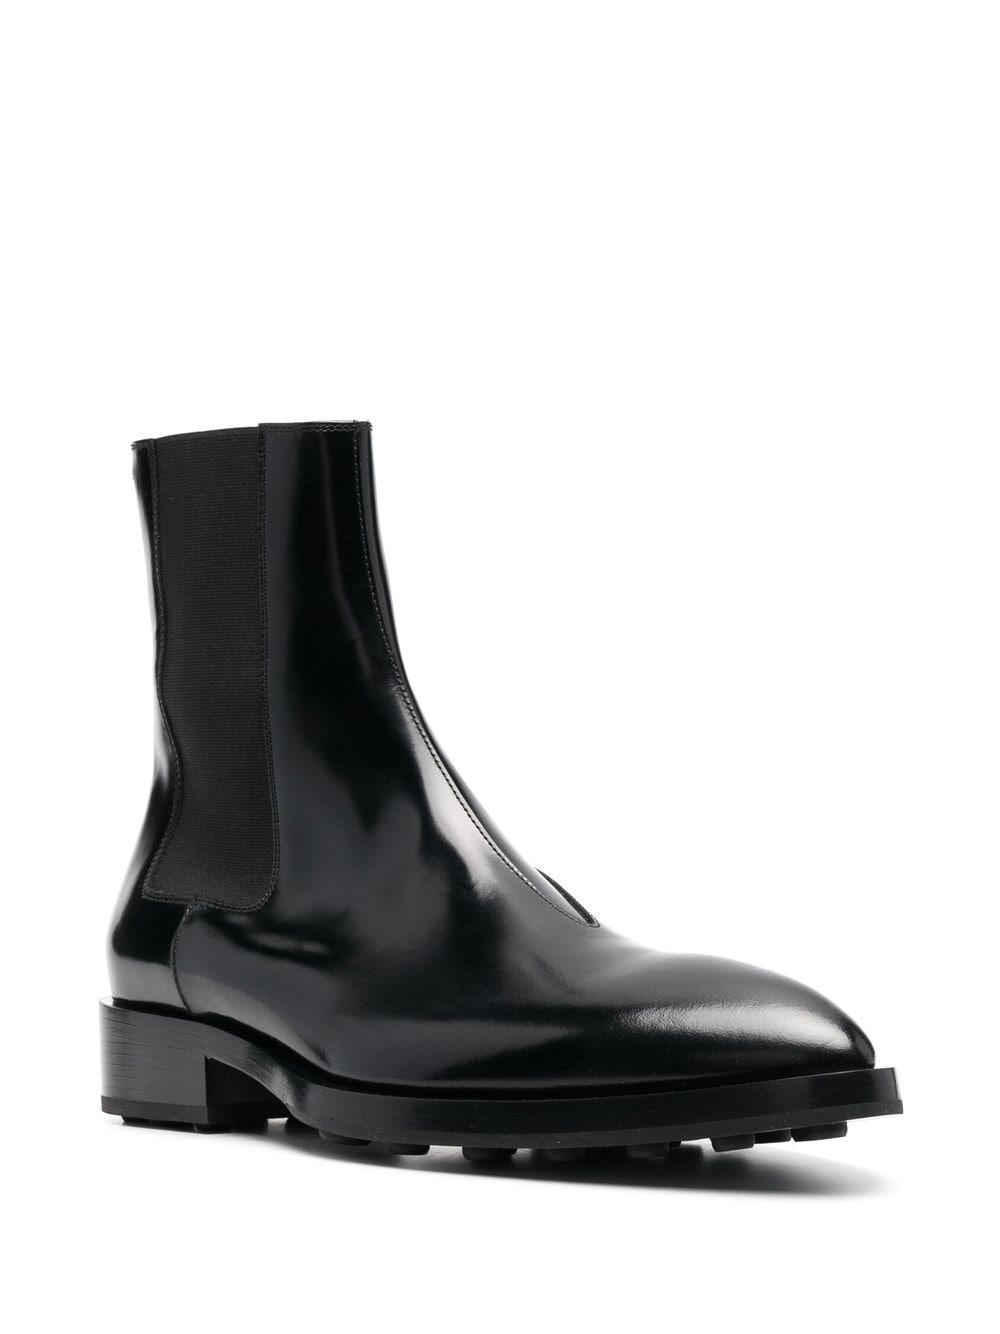 Jil Sander pointed-toe Leather Chelsea Boots - Farfetch